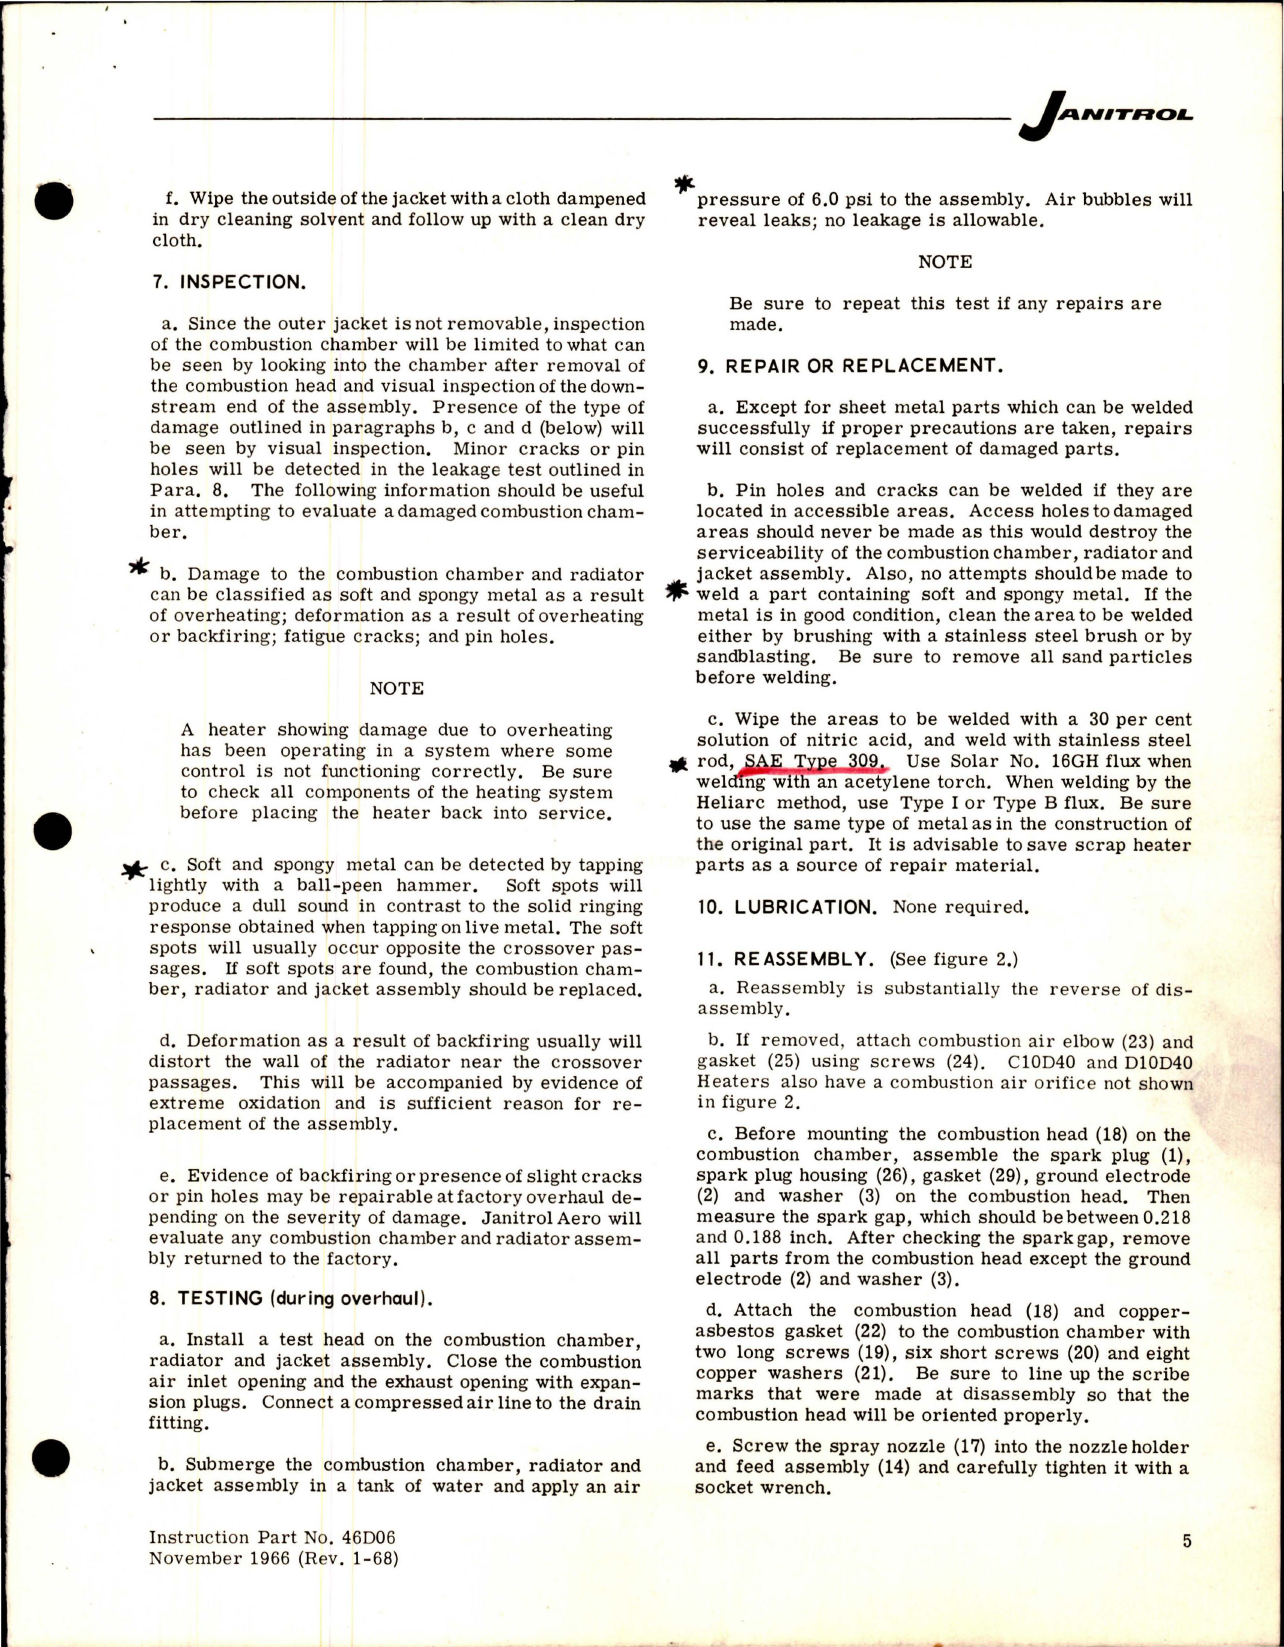 Sample page 5 from AirCorps Library document: Maintenance Instructions for Aircraft Heater Assembly - Series 10D40, Type S-100 